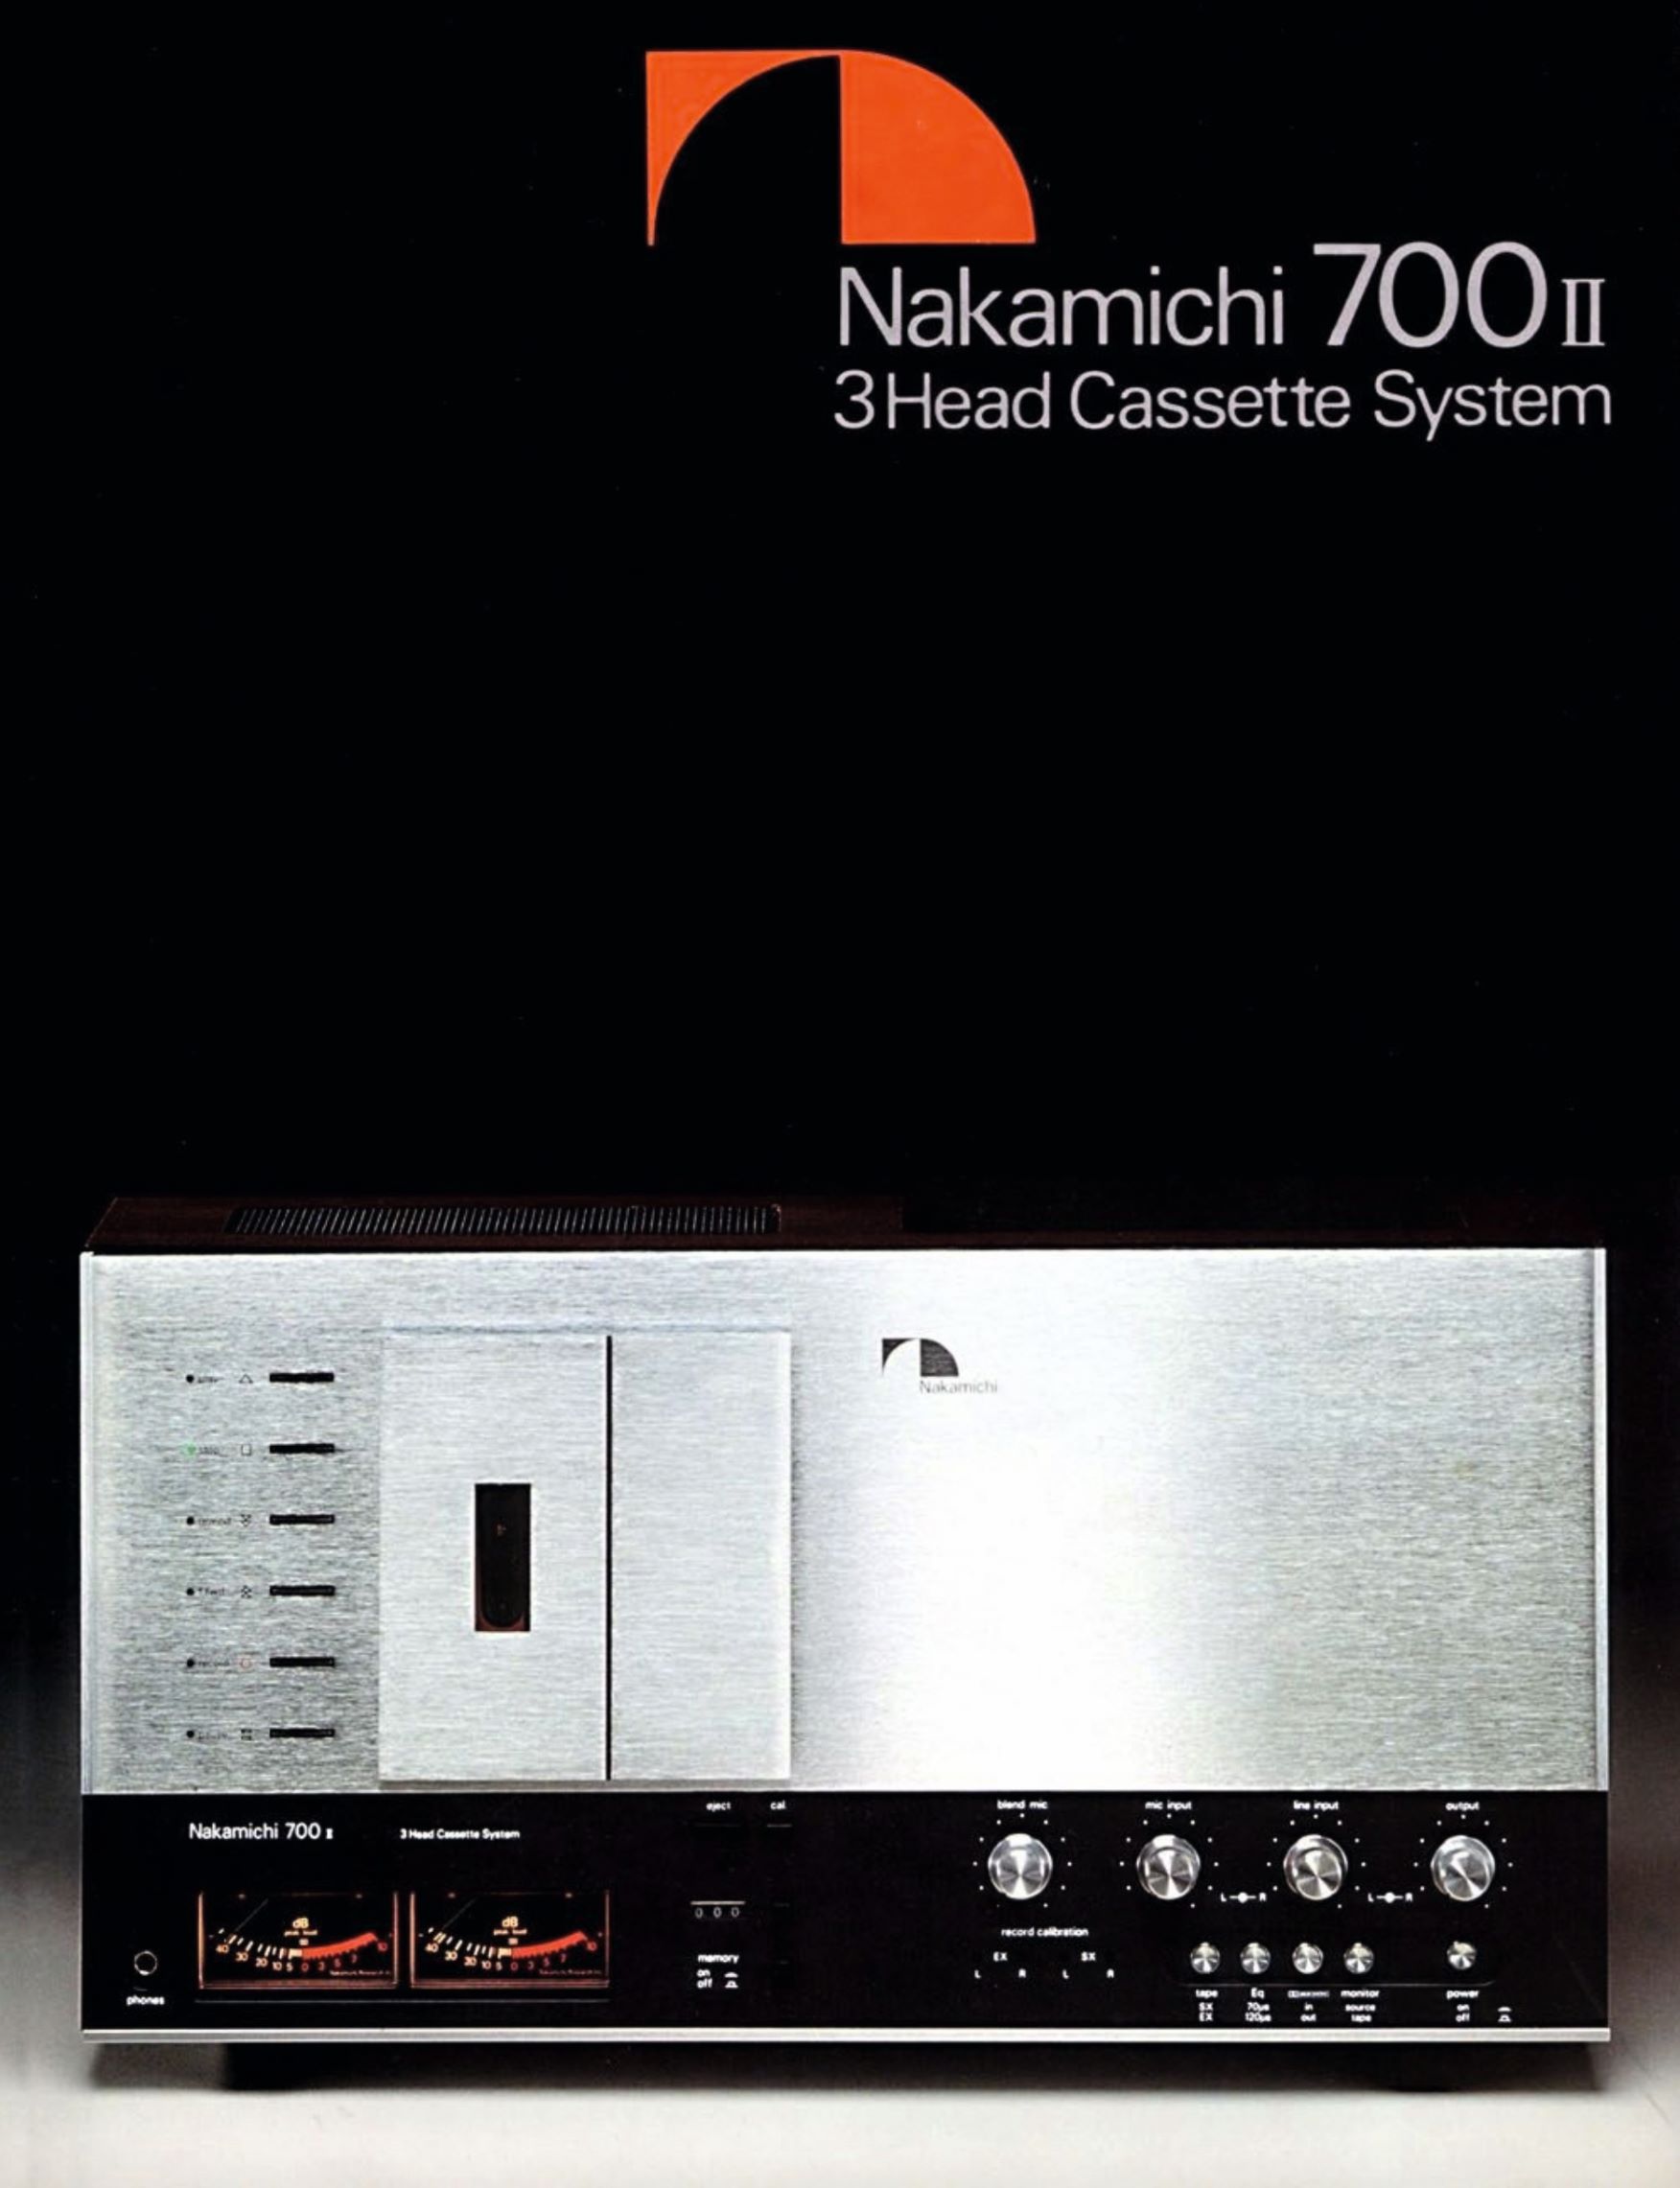 Promotional brochure for the 700ii three-head cassette system, Nakamichi, 1977